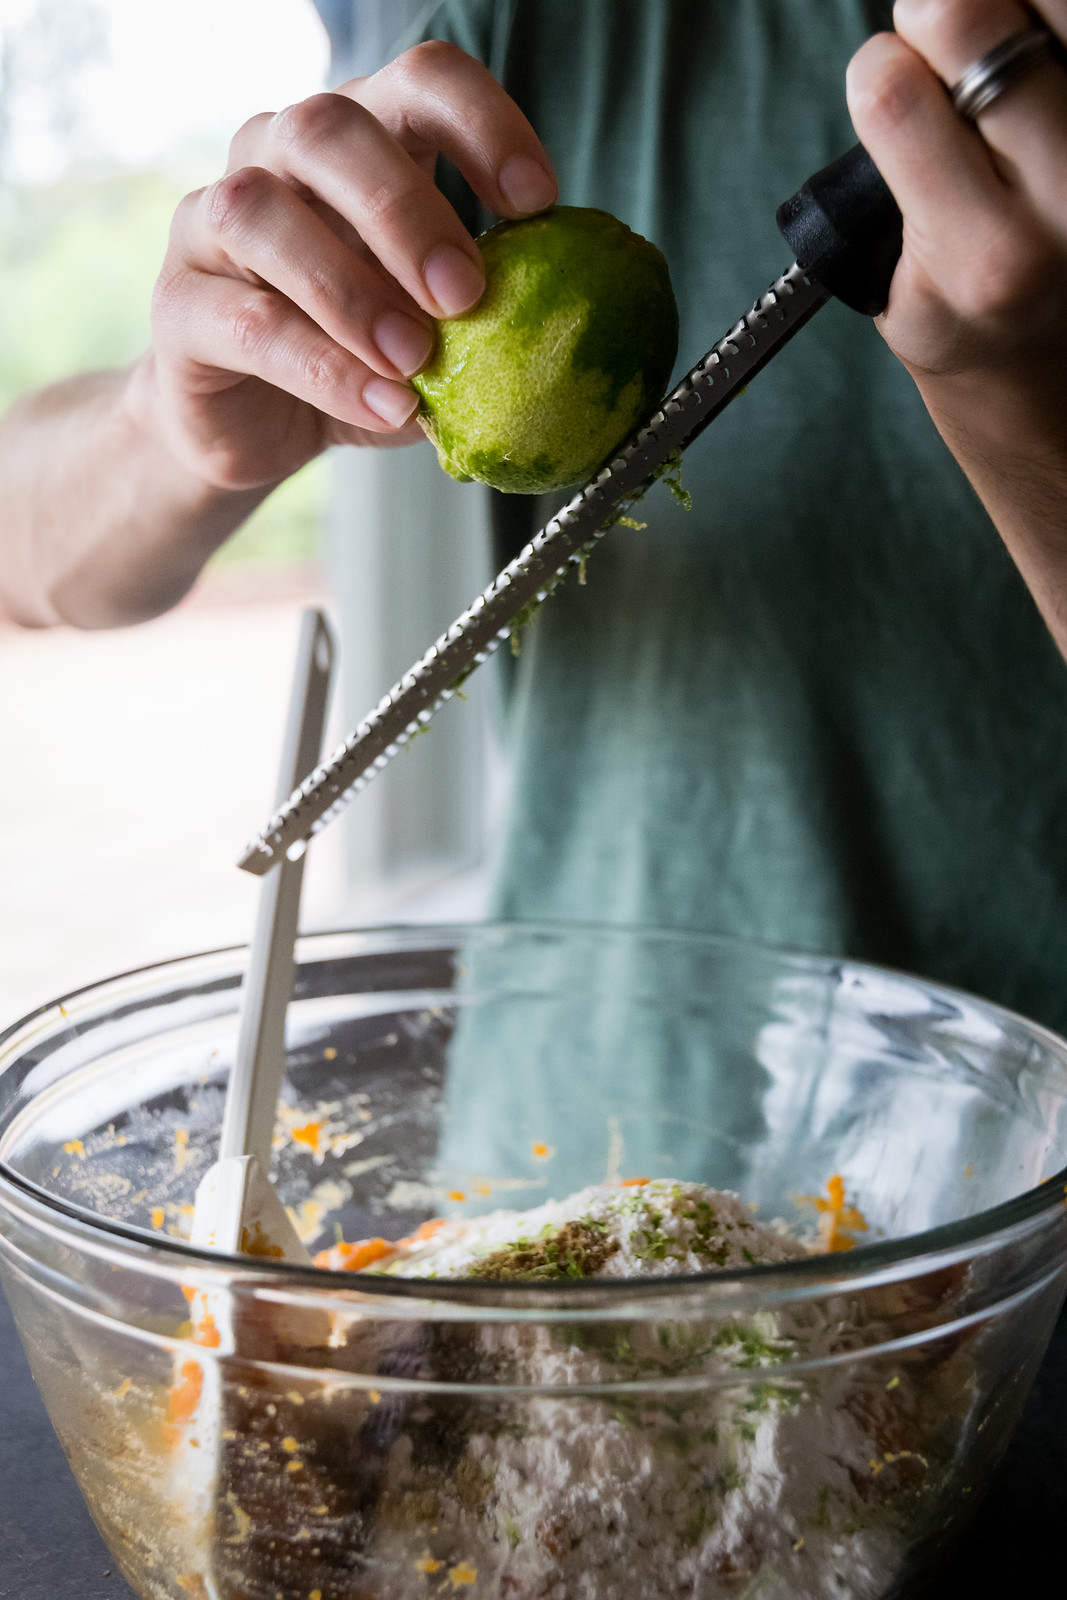 no need to measure, just zest right into the bowl